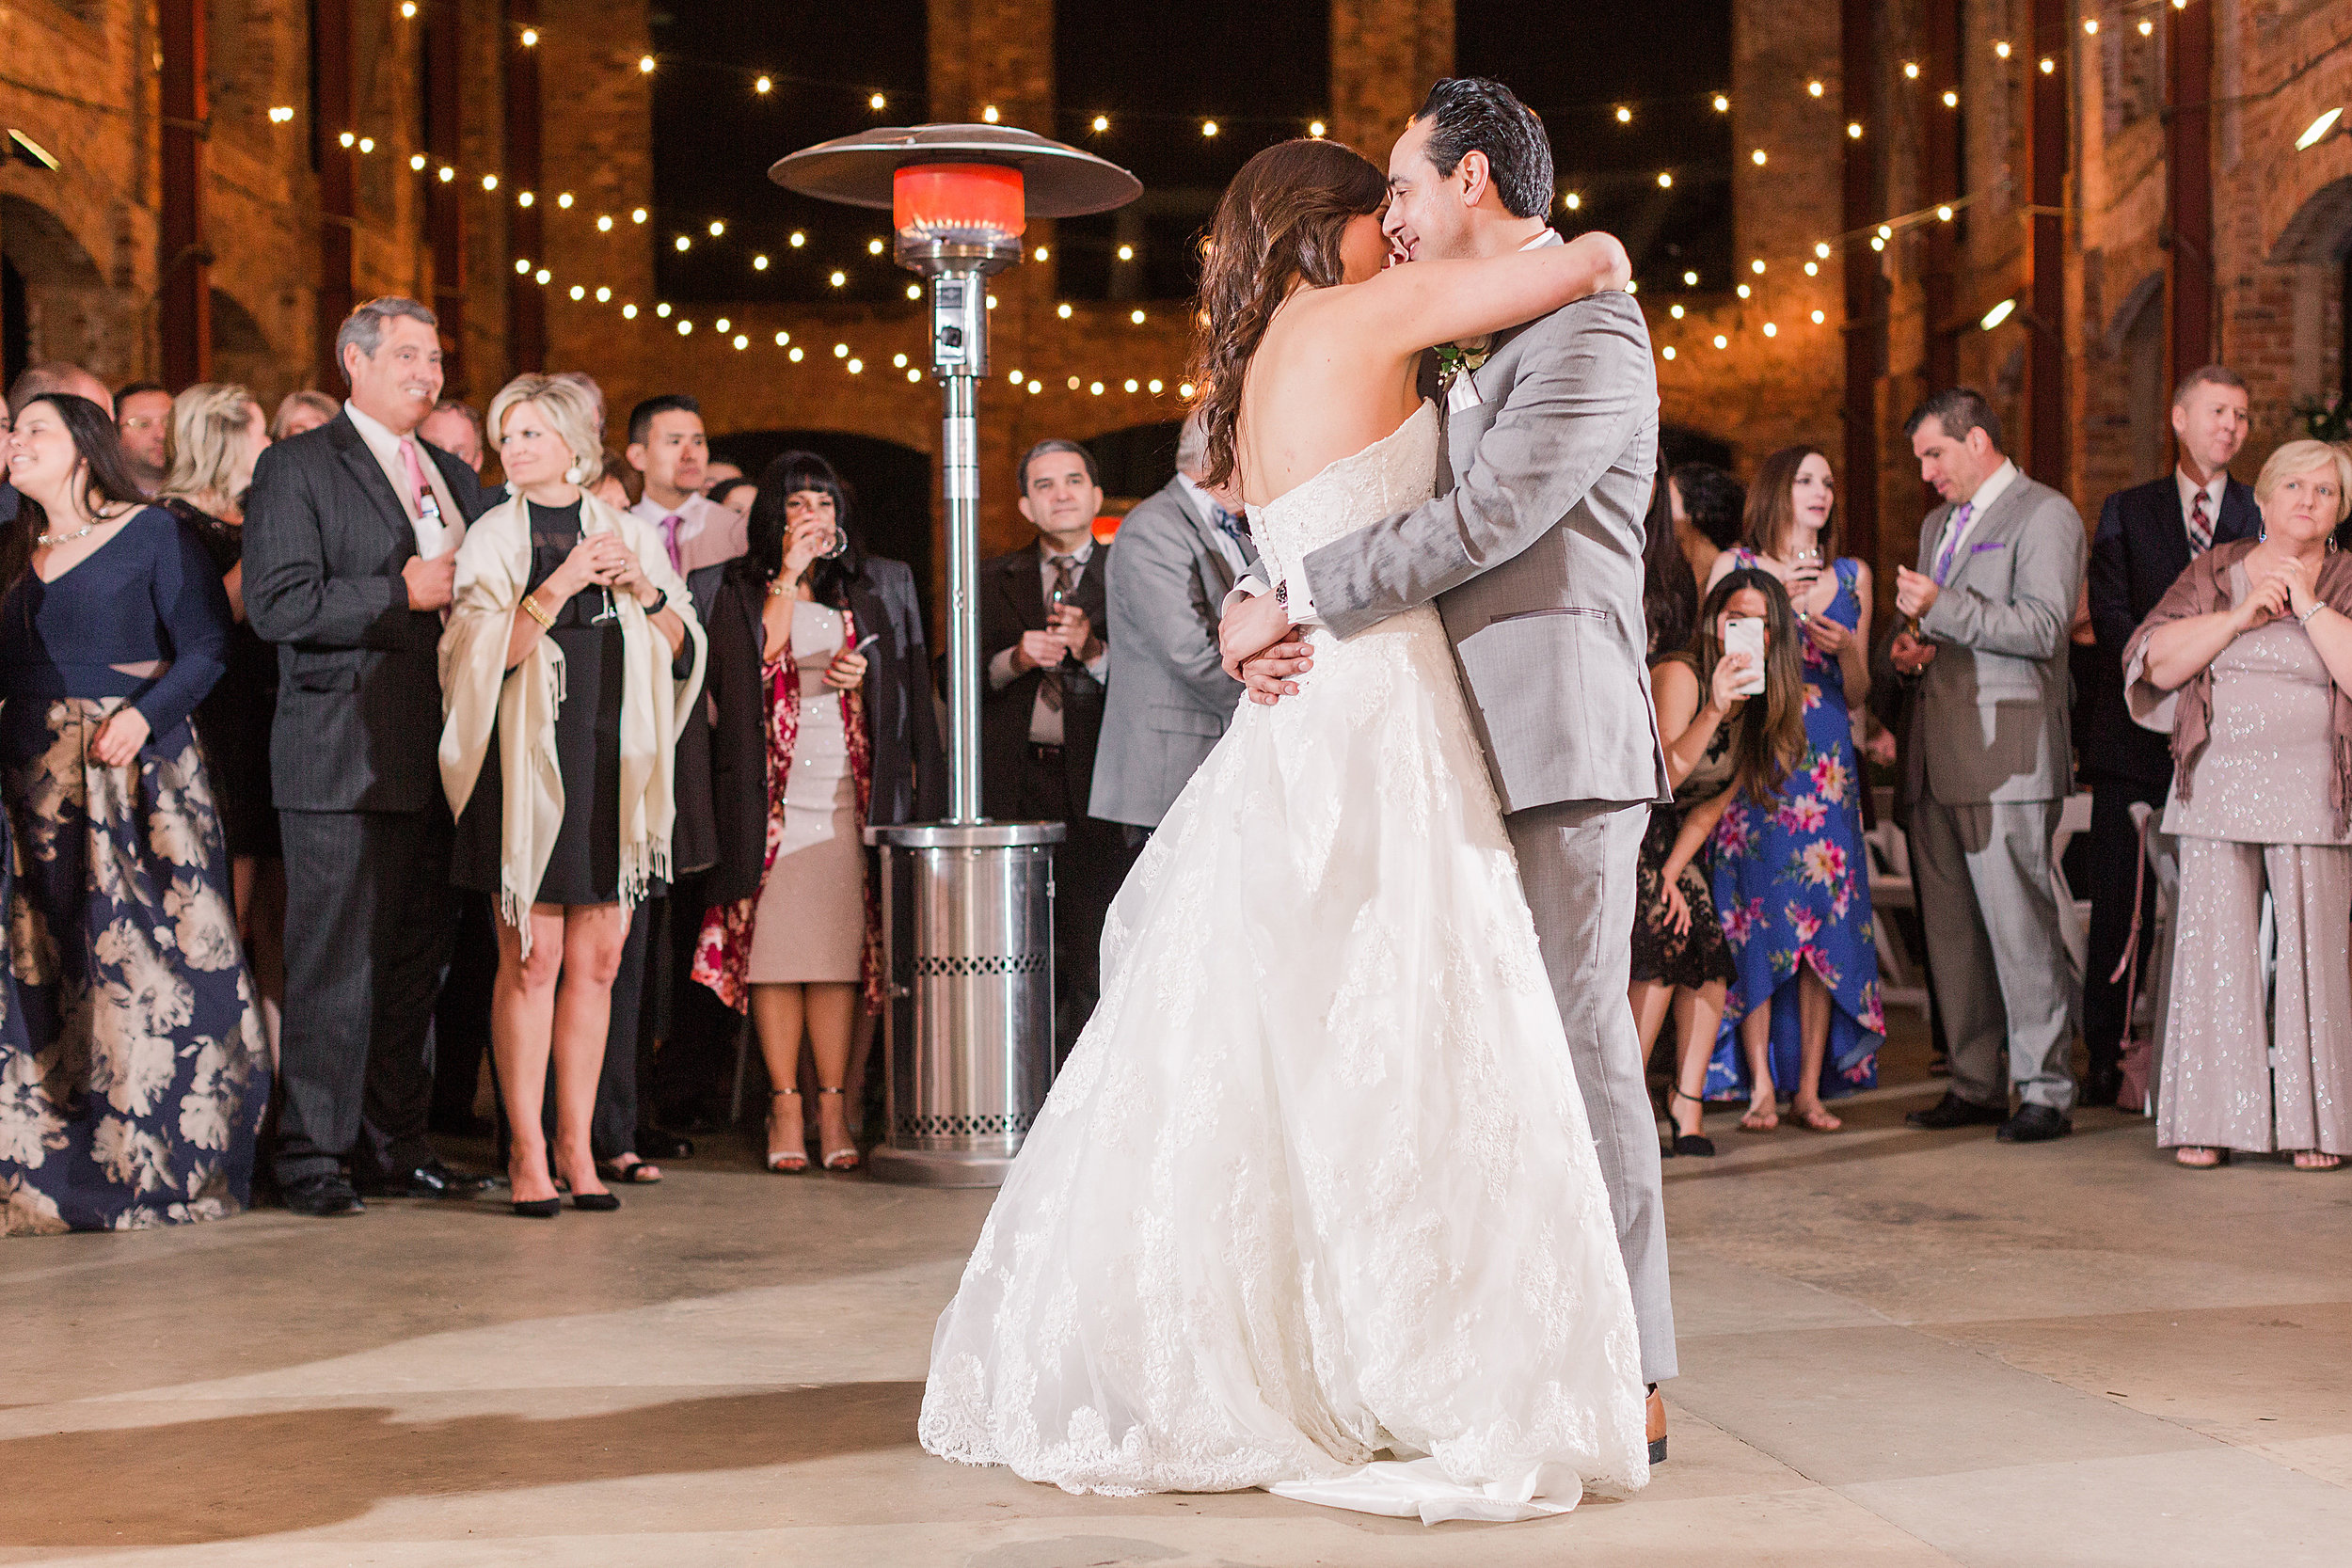  Such a romantic first dance! 